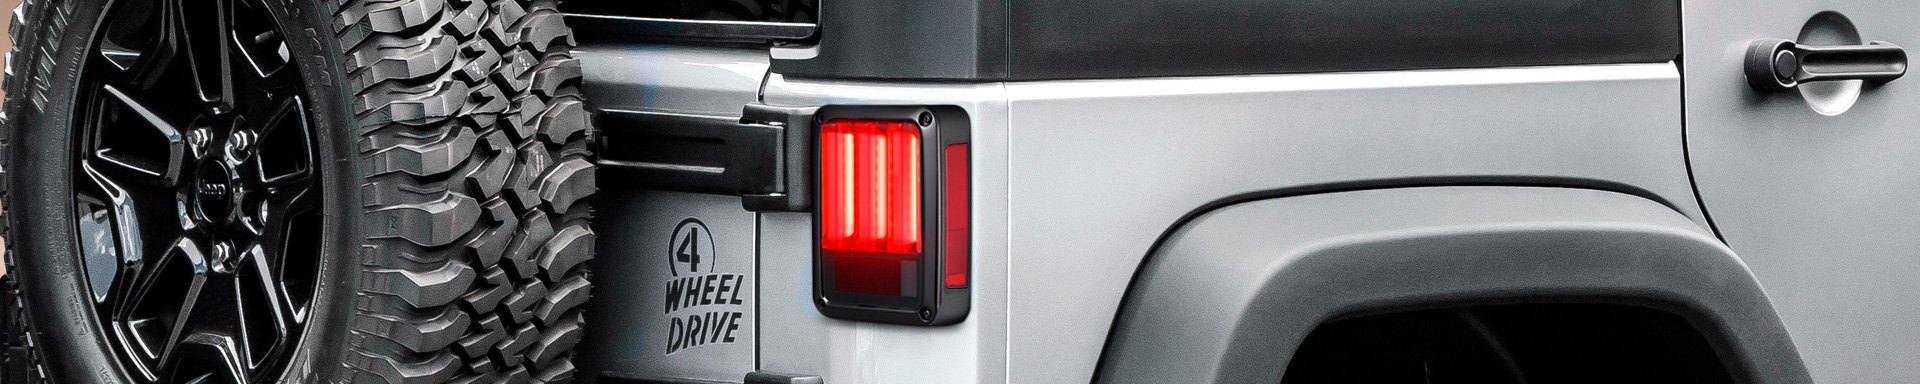 Add Sleek Styling To Your JK/JL’s Rear End With New Lumen LED Tail Lights